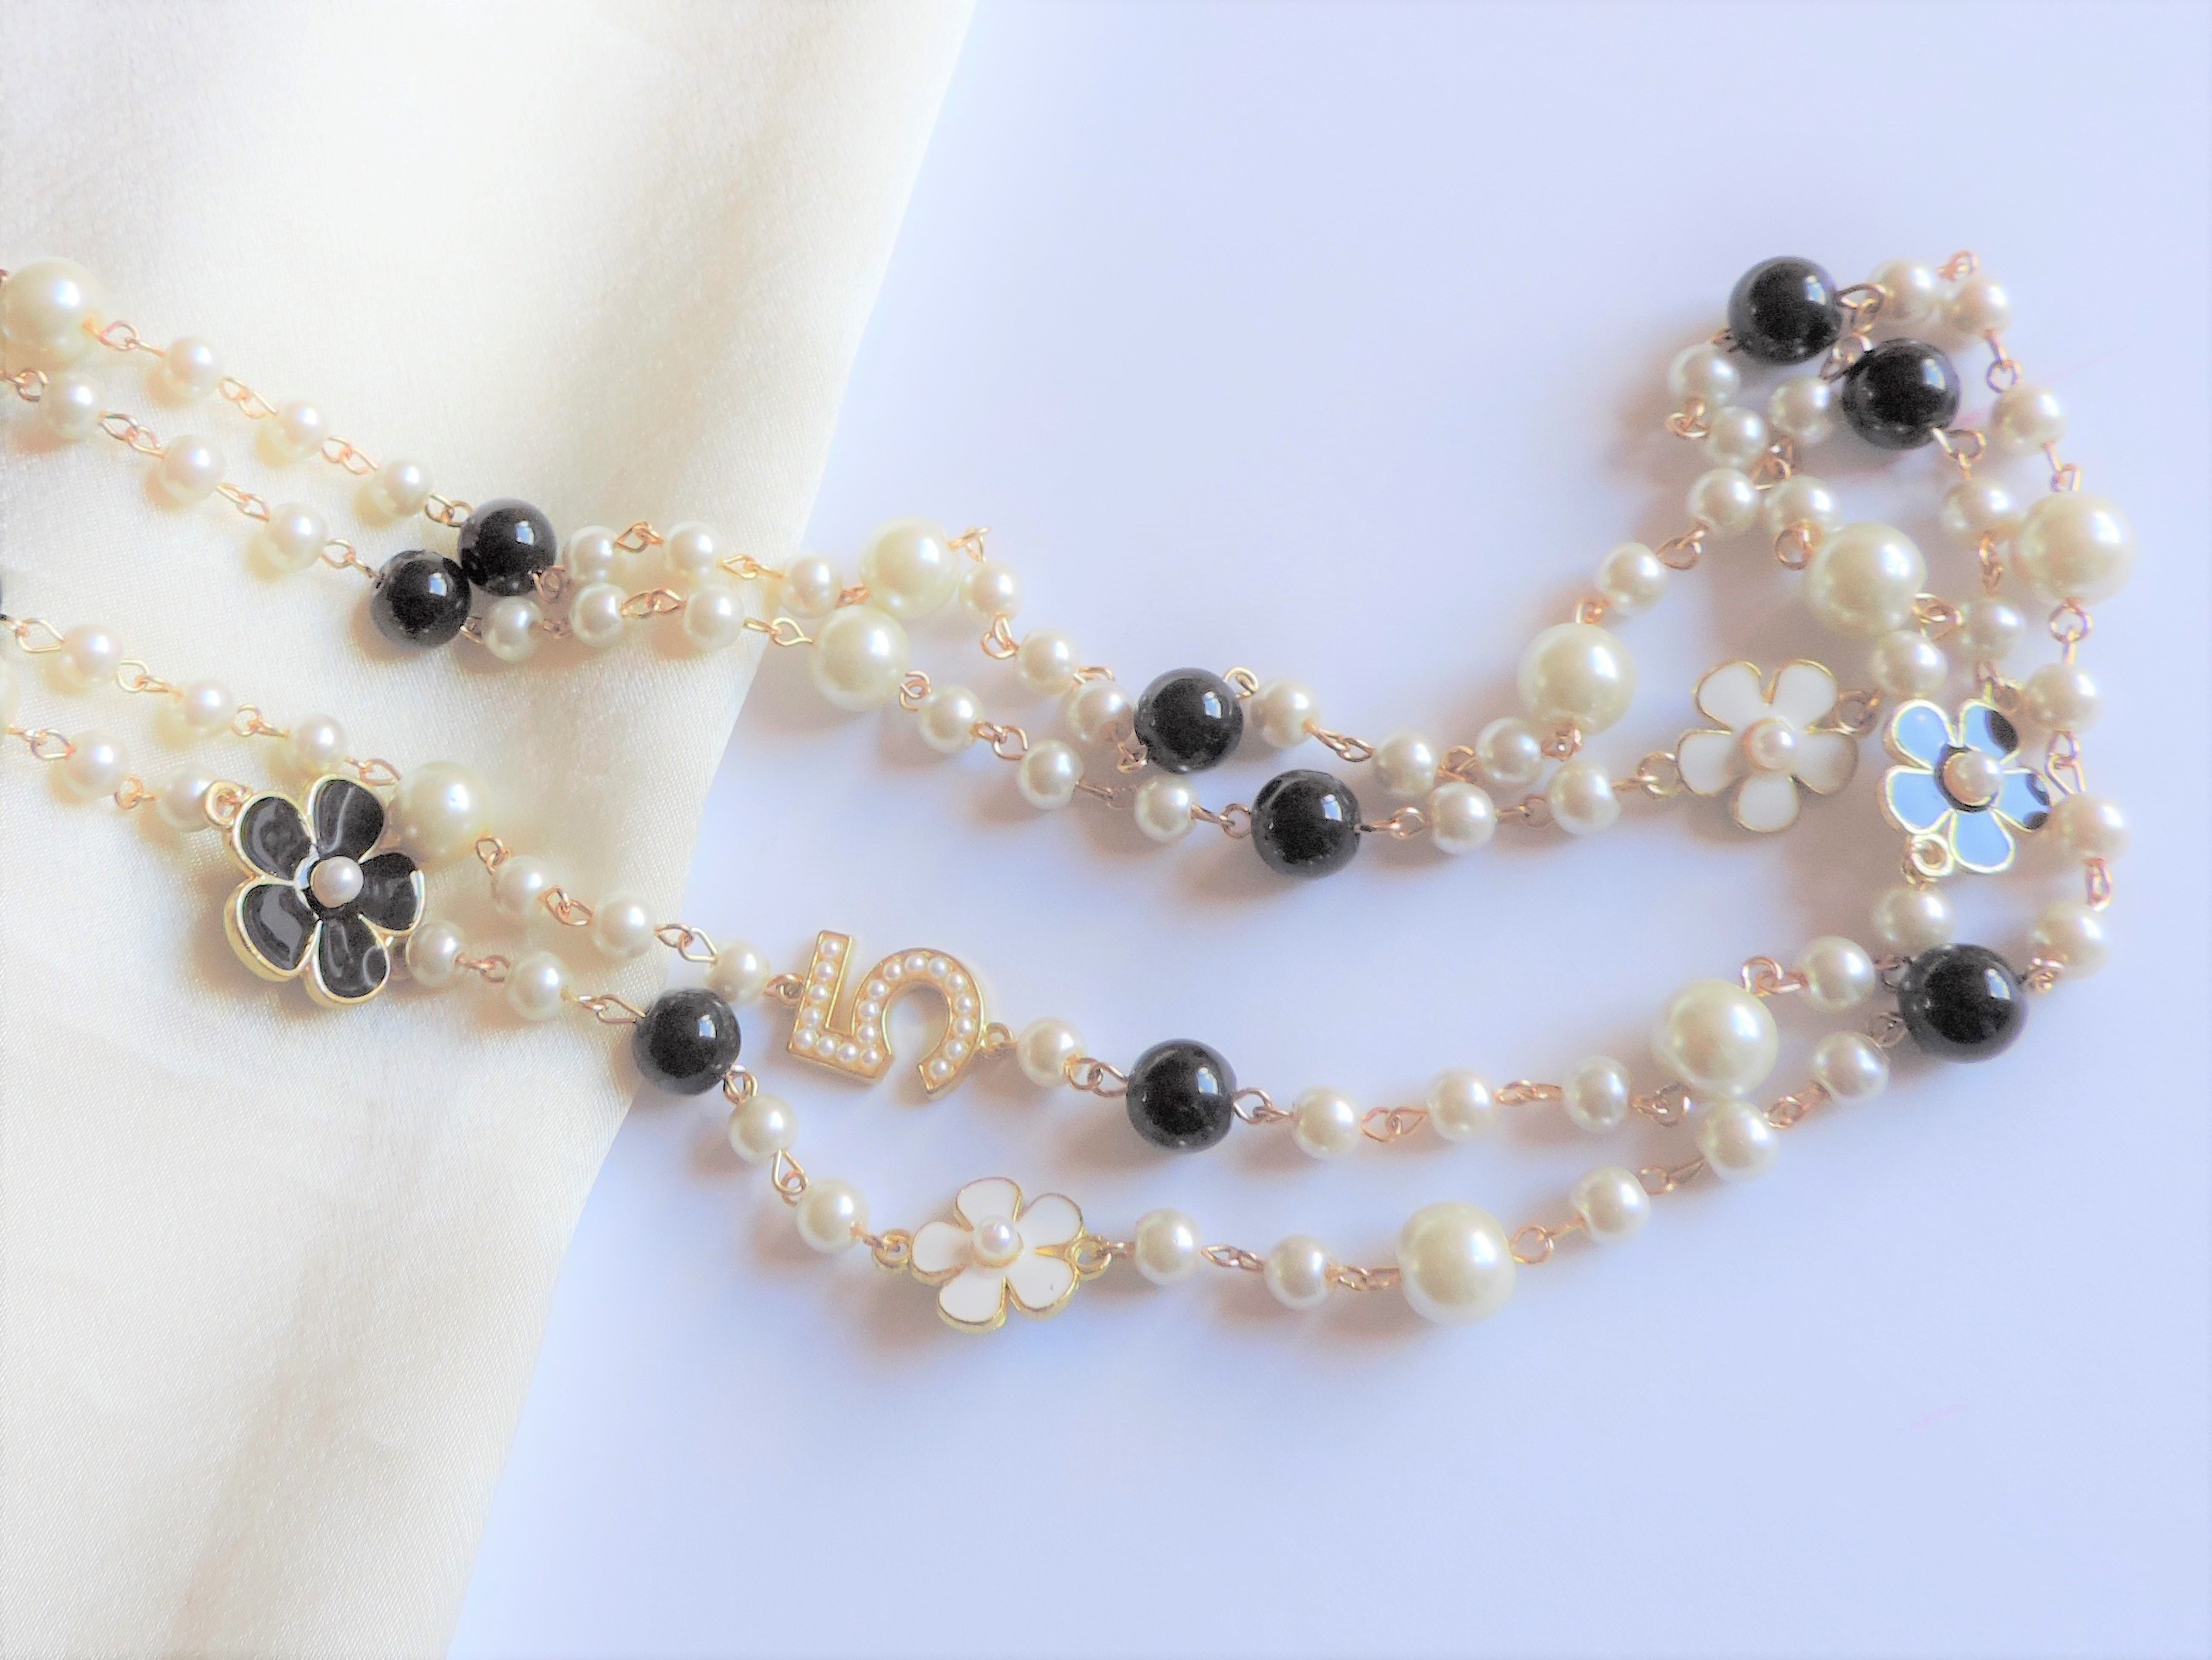 Black and White Number 5 Pearl Necklace 28 inches Long